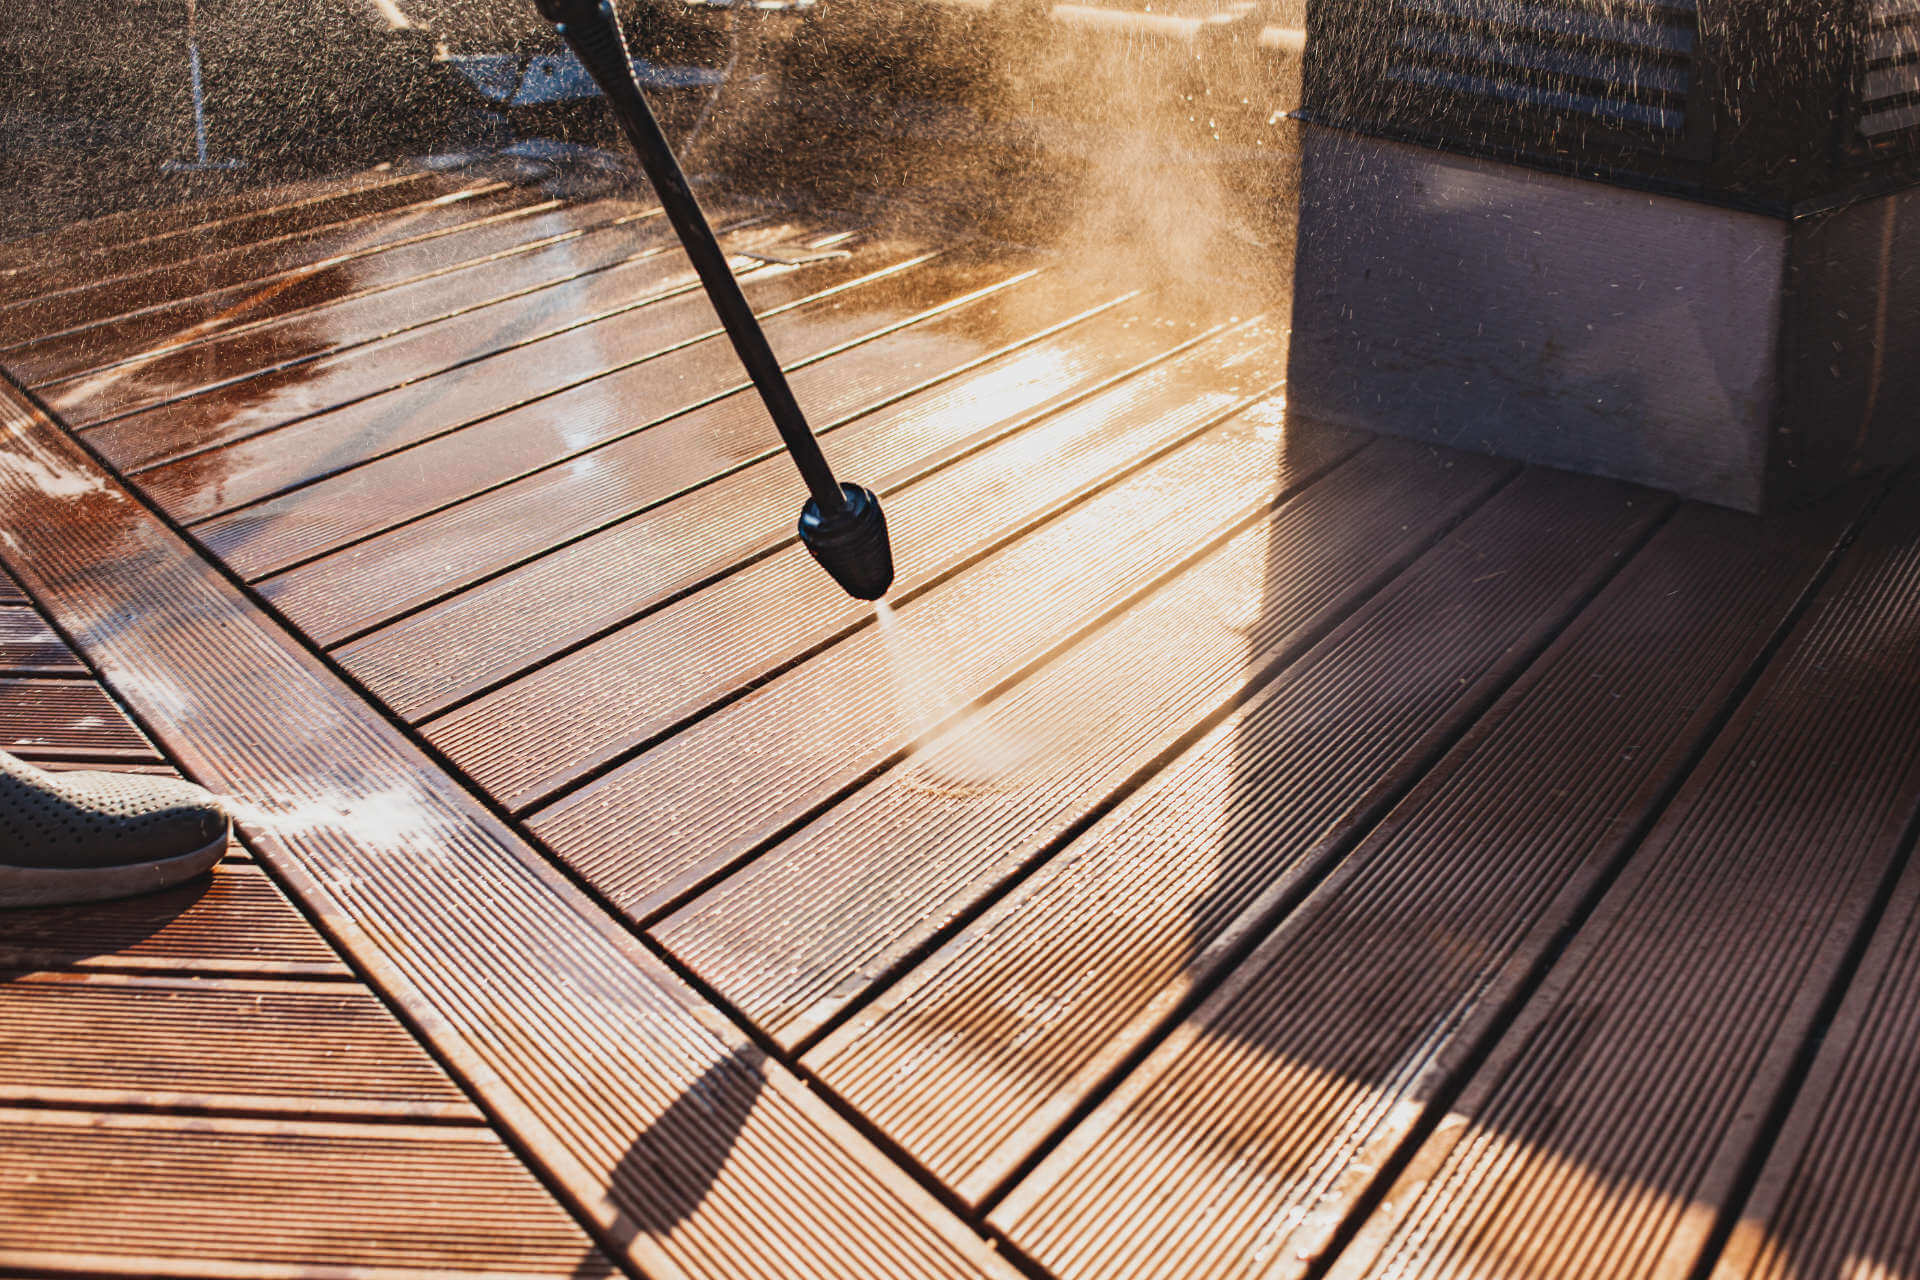 Why Should Get Your Deck Cleaned In Springtime?